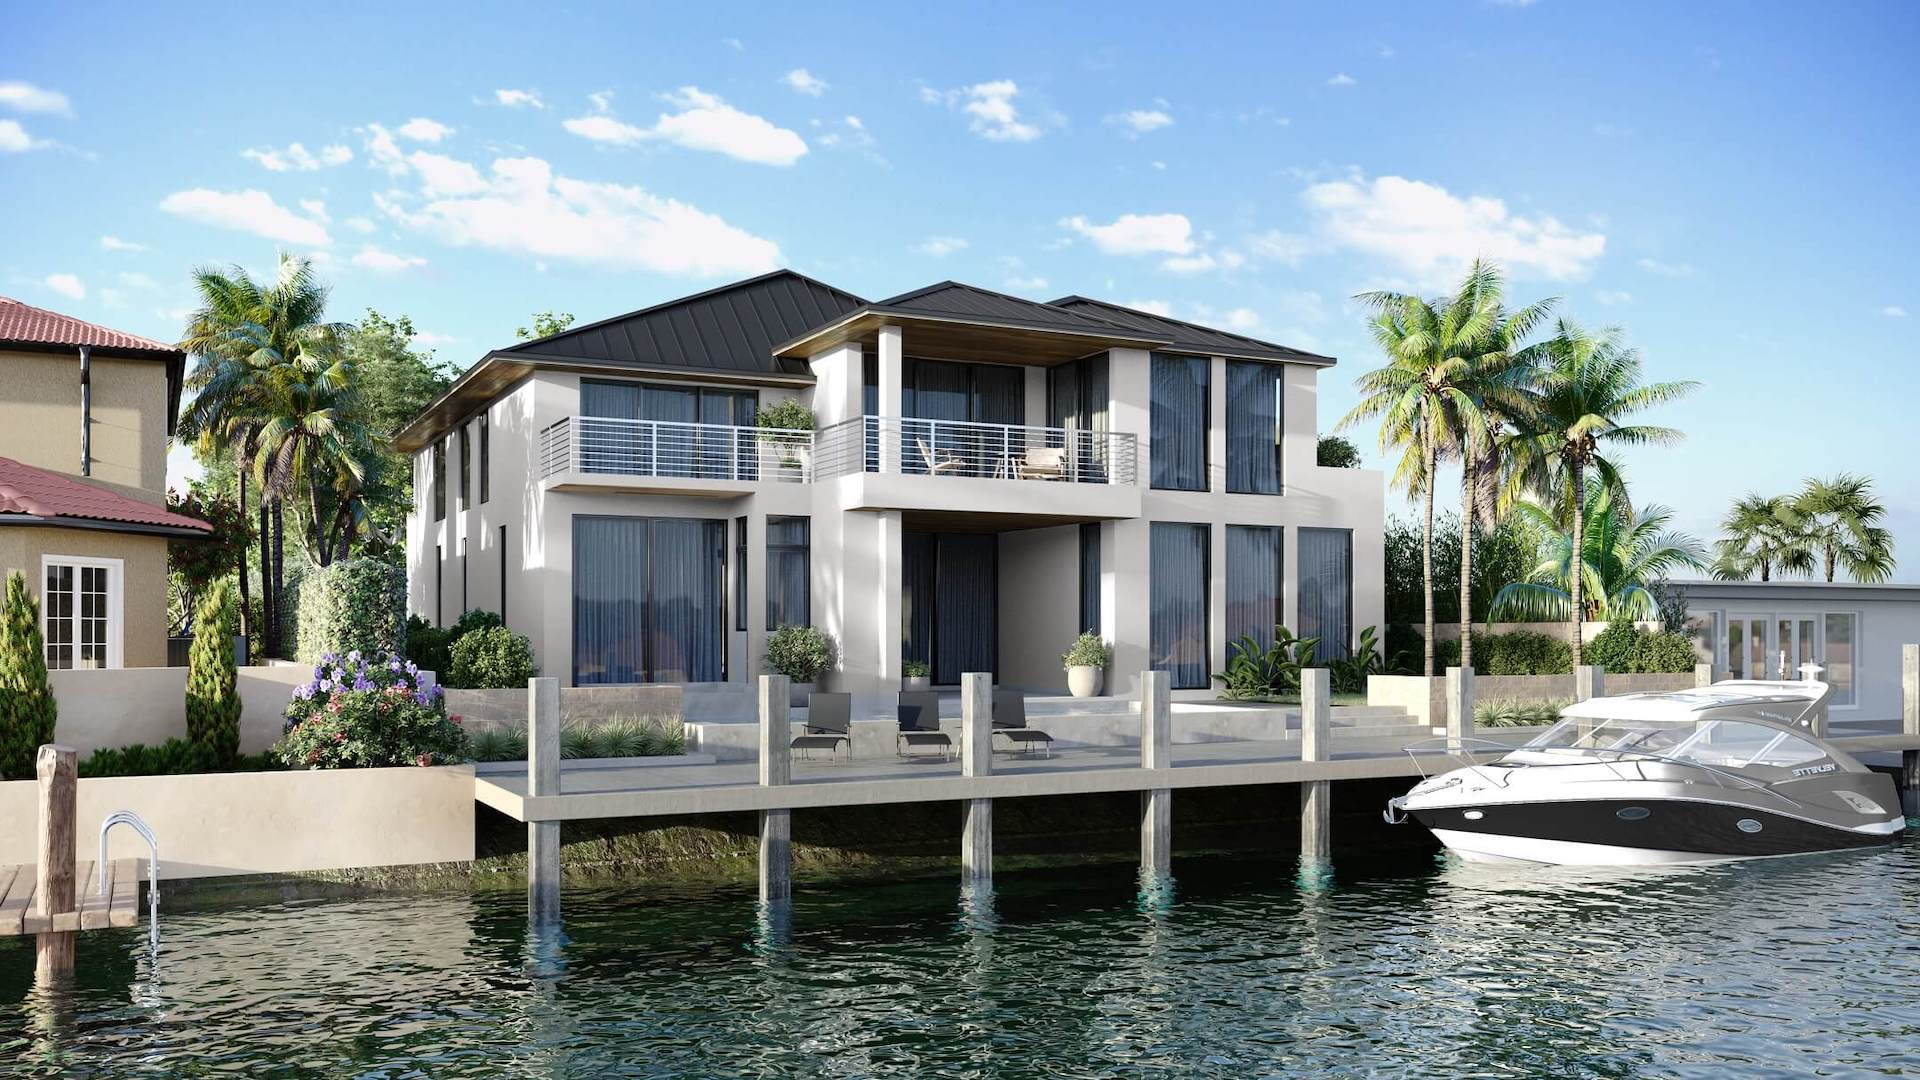 3D Architectural Rendering of House in Florida